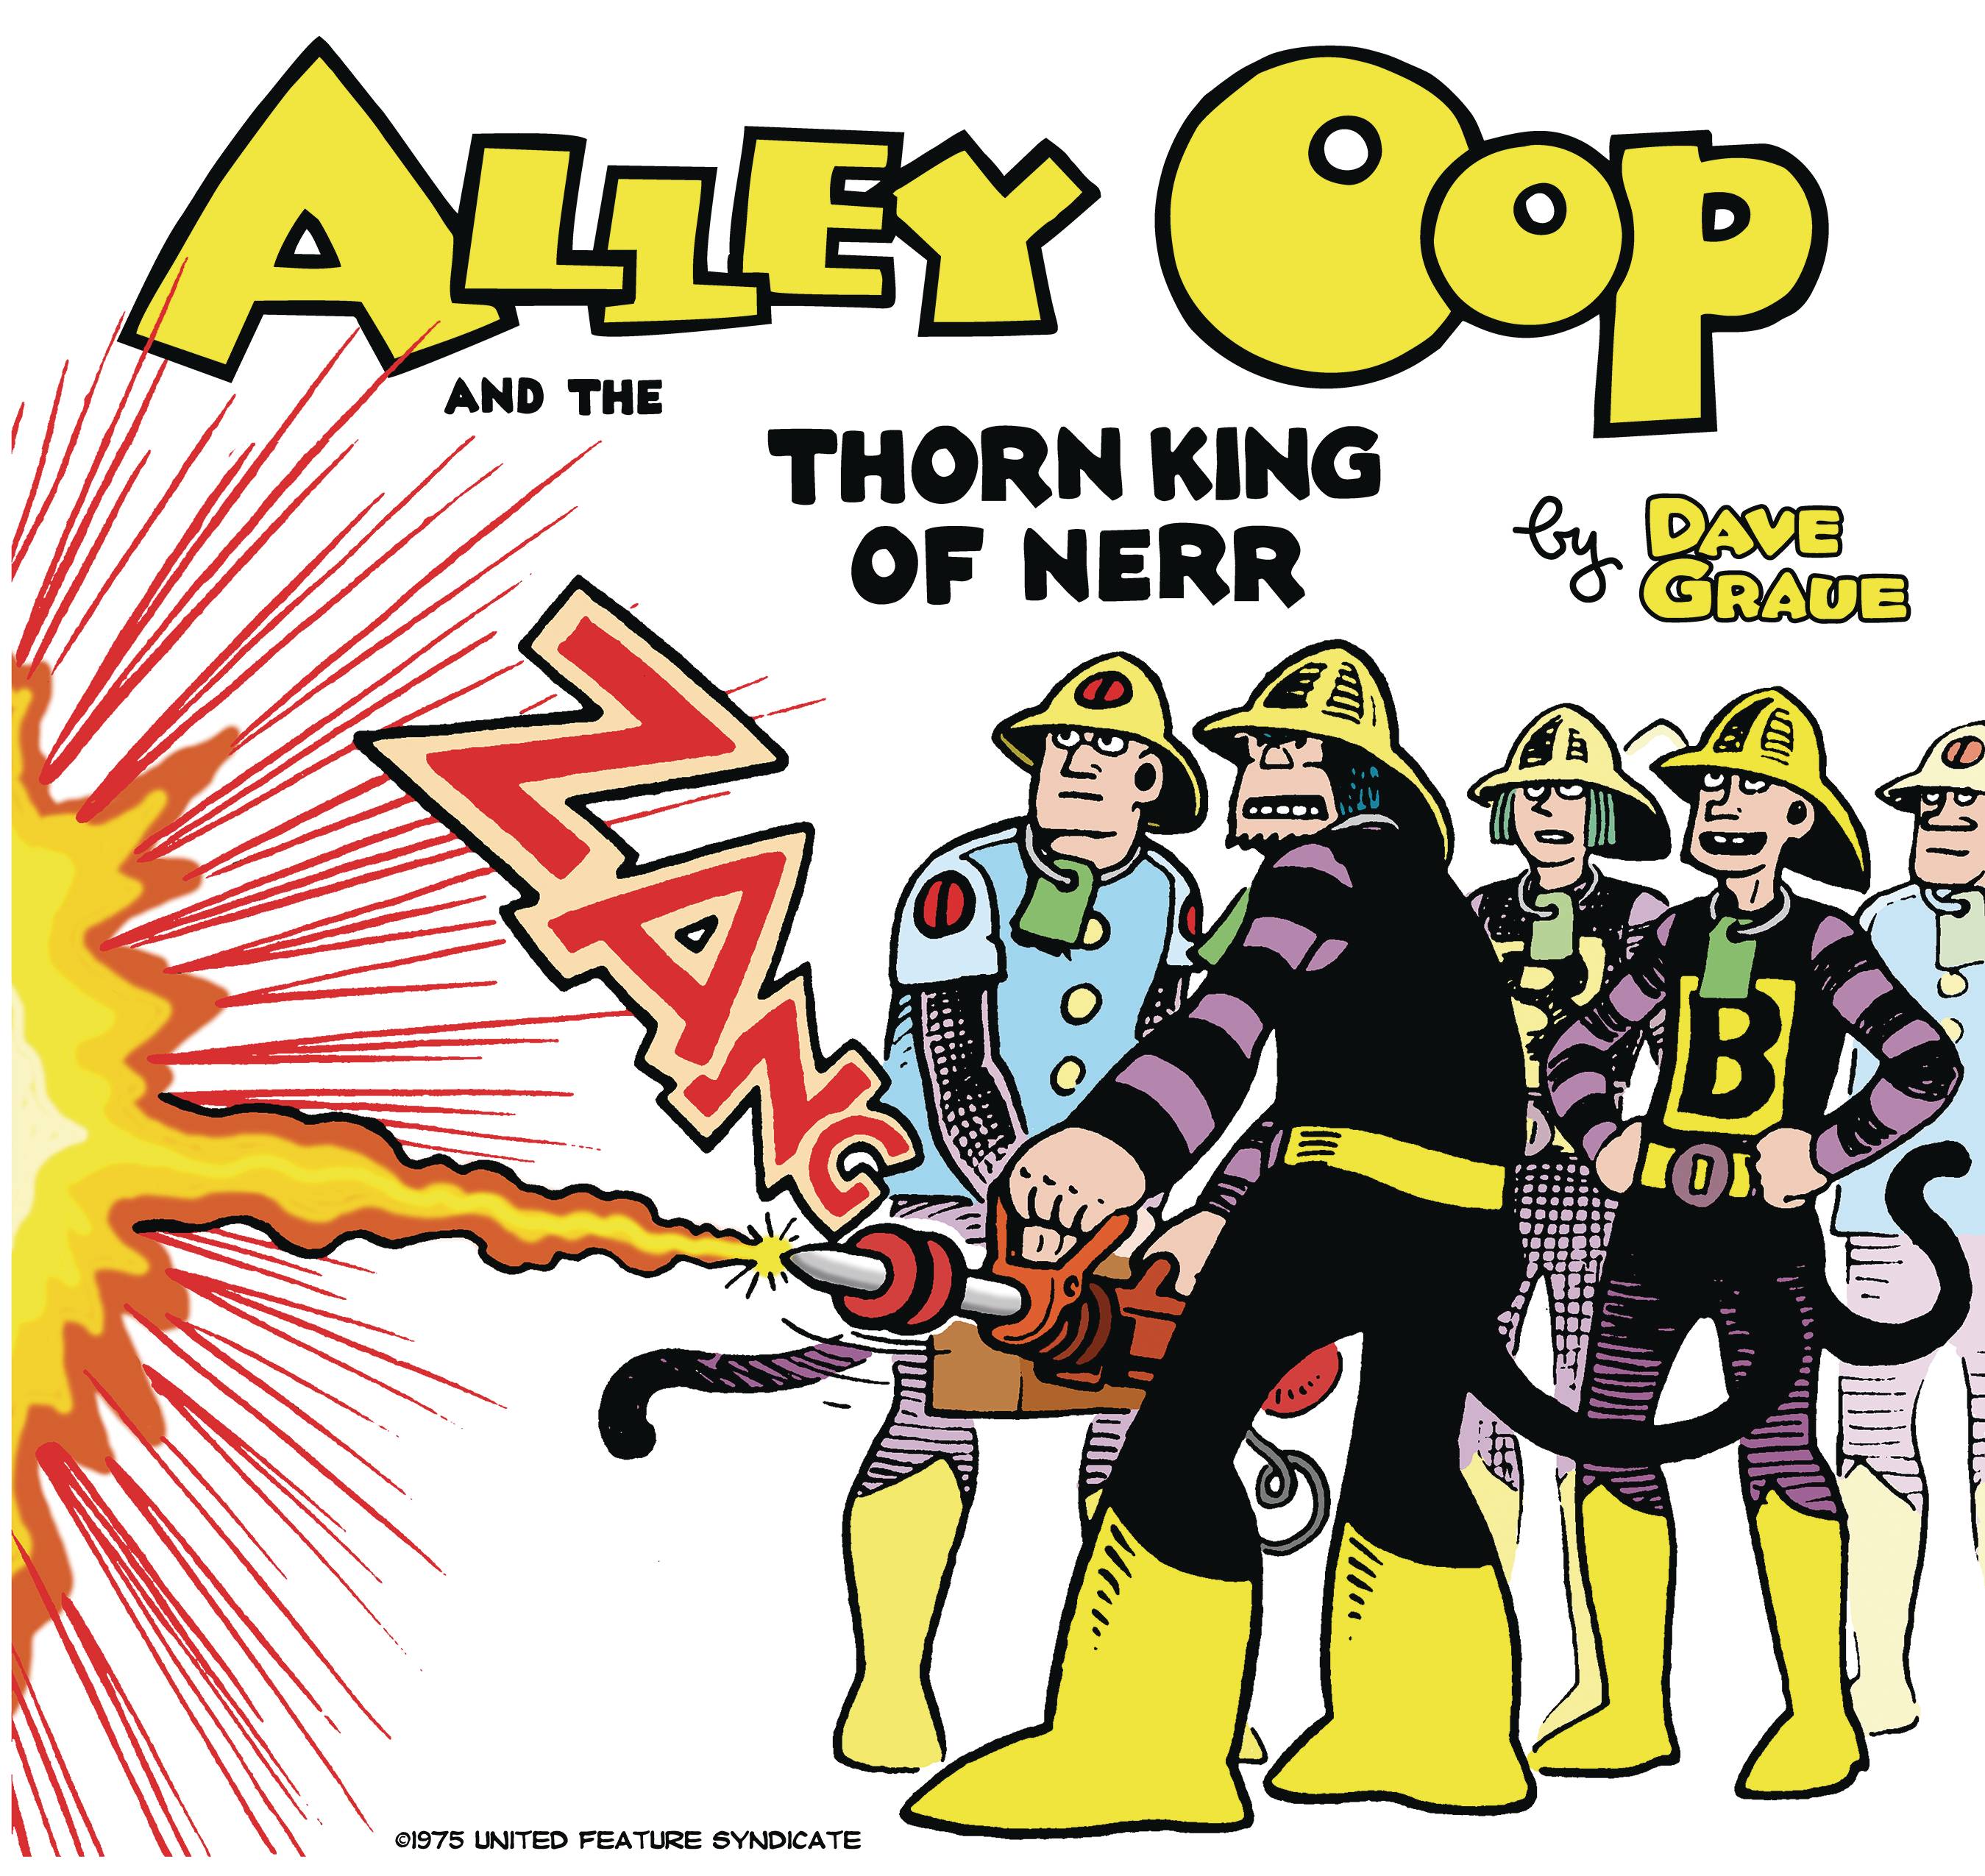 ALLEY OOP AND THORN KING OF NERR